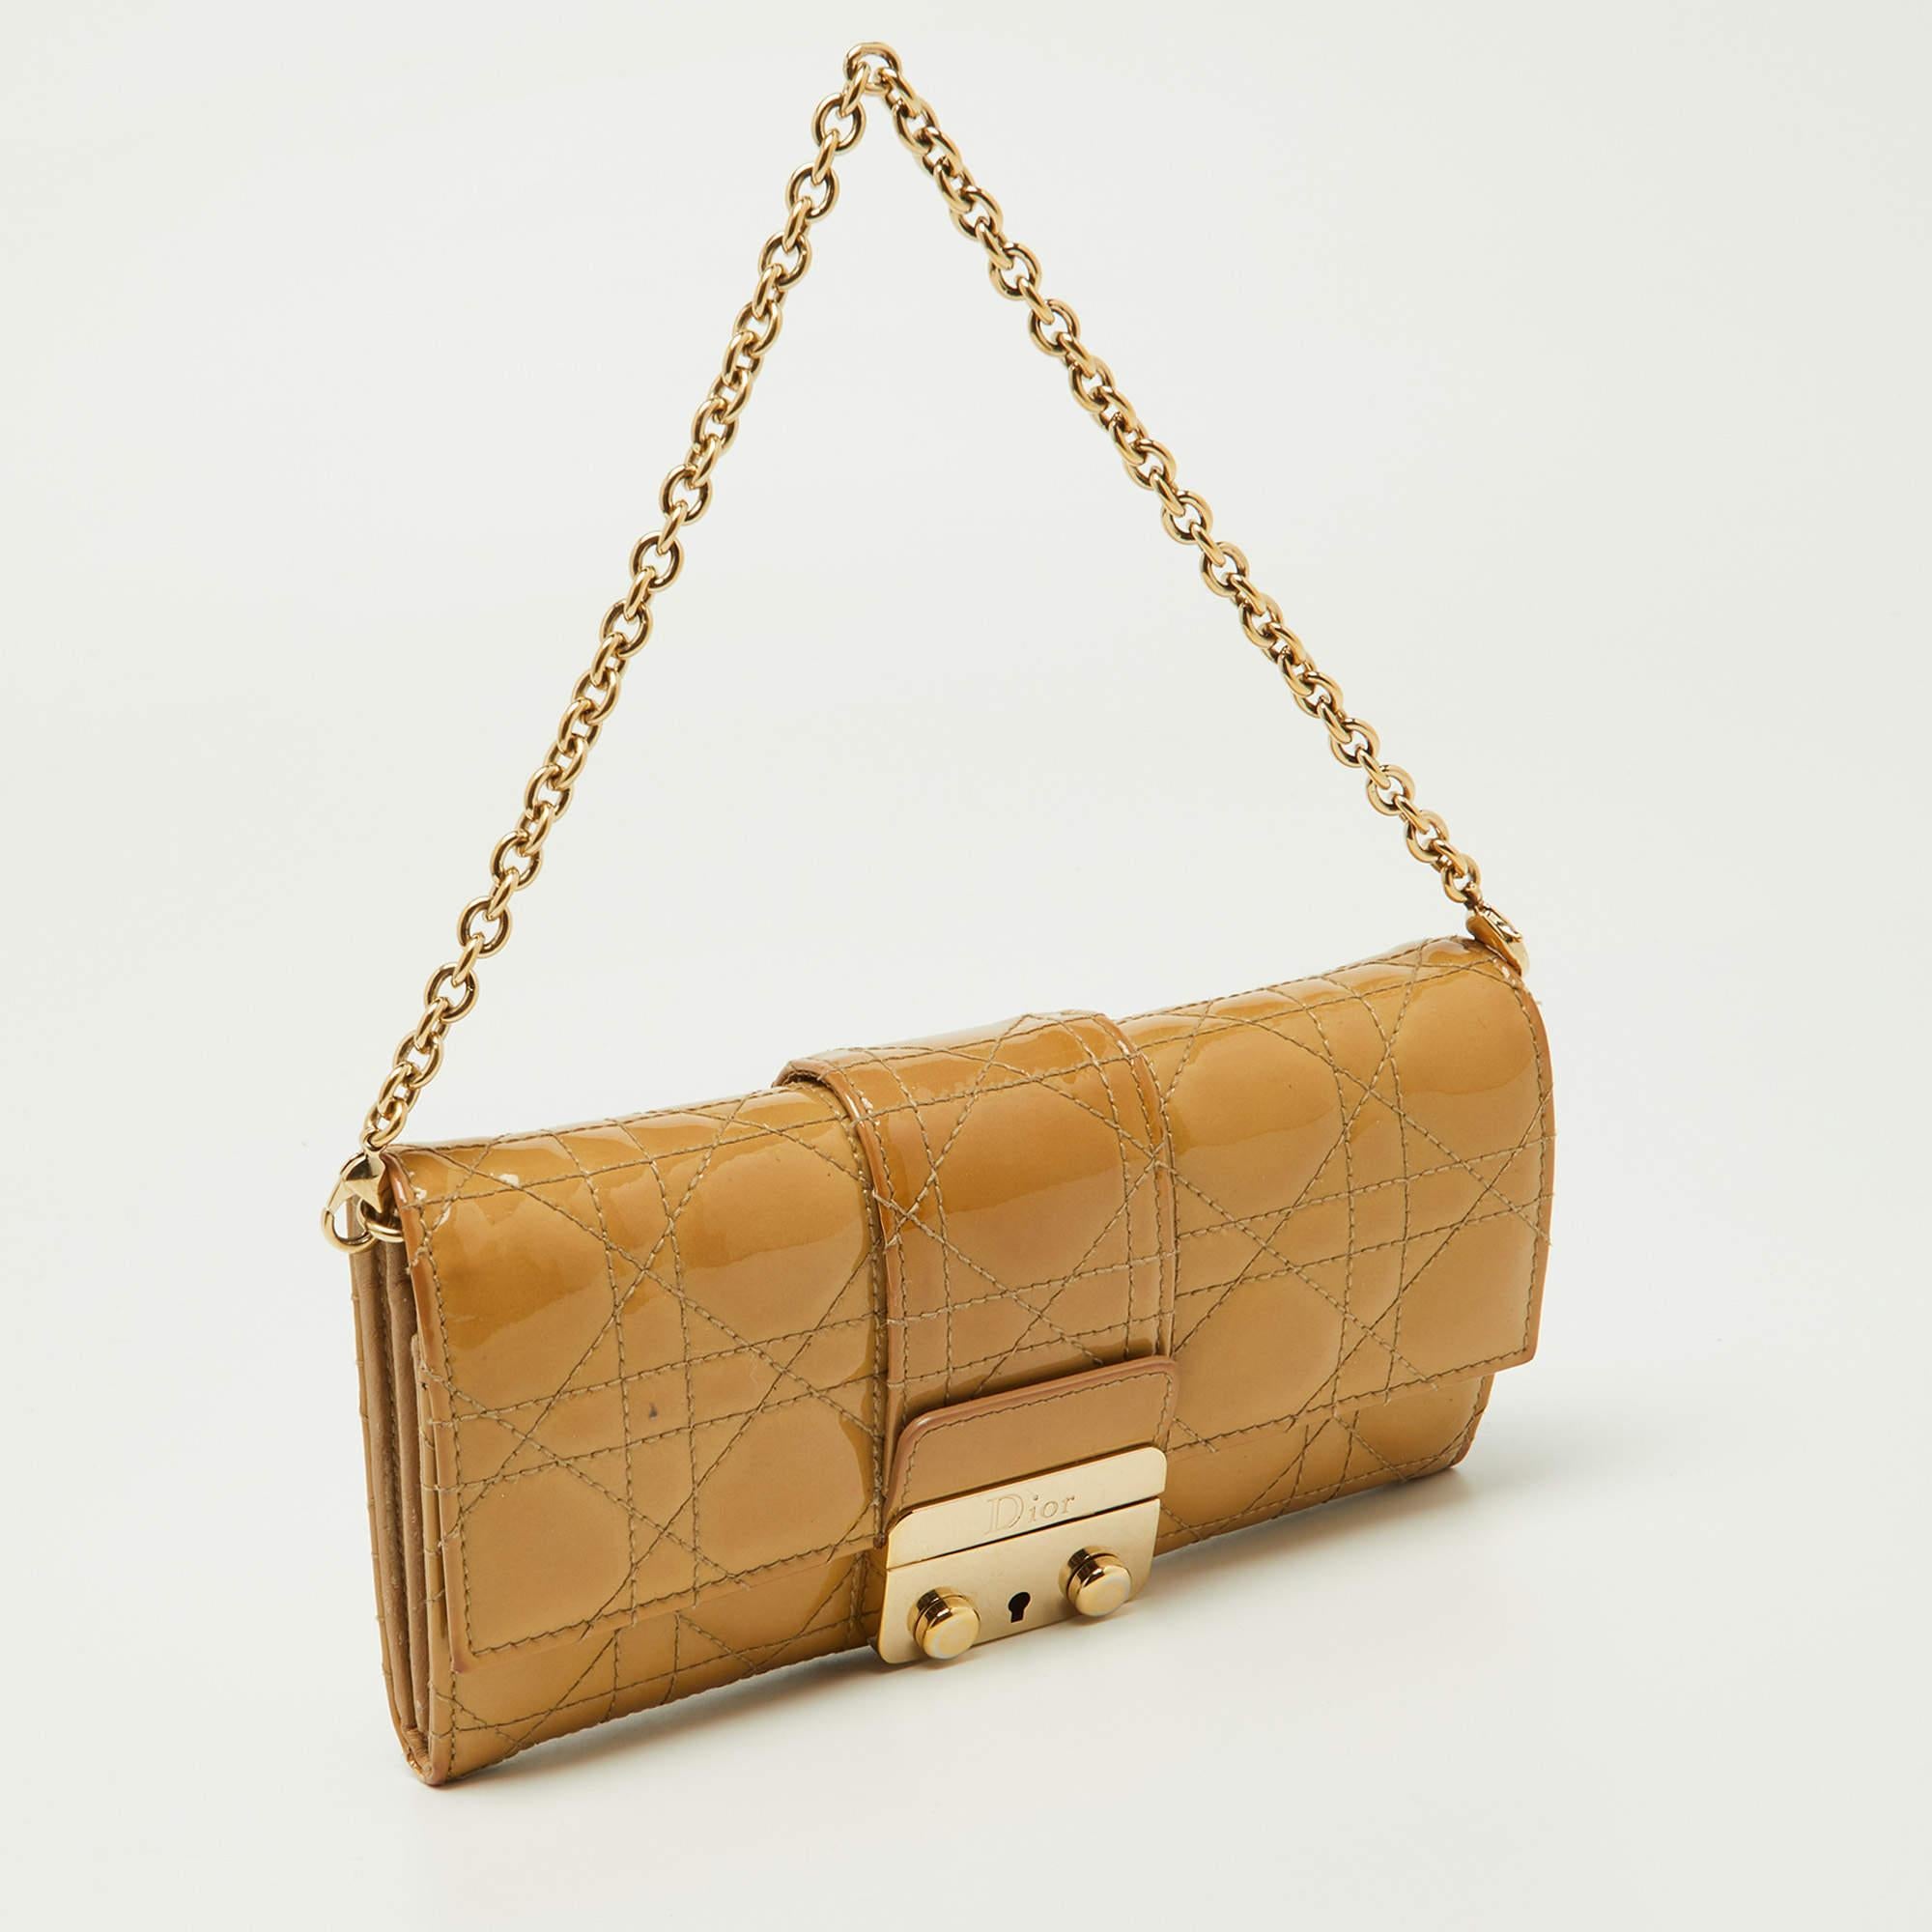 Dazzling in a gorgeous beige shade, this Dior WOC is crafted from patent leather in their Cannage pattern and designed with a front flap that is detailed with a gold-tone lock. The leather and nylon-lined interior houses a zip pocket, slip pockets,